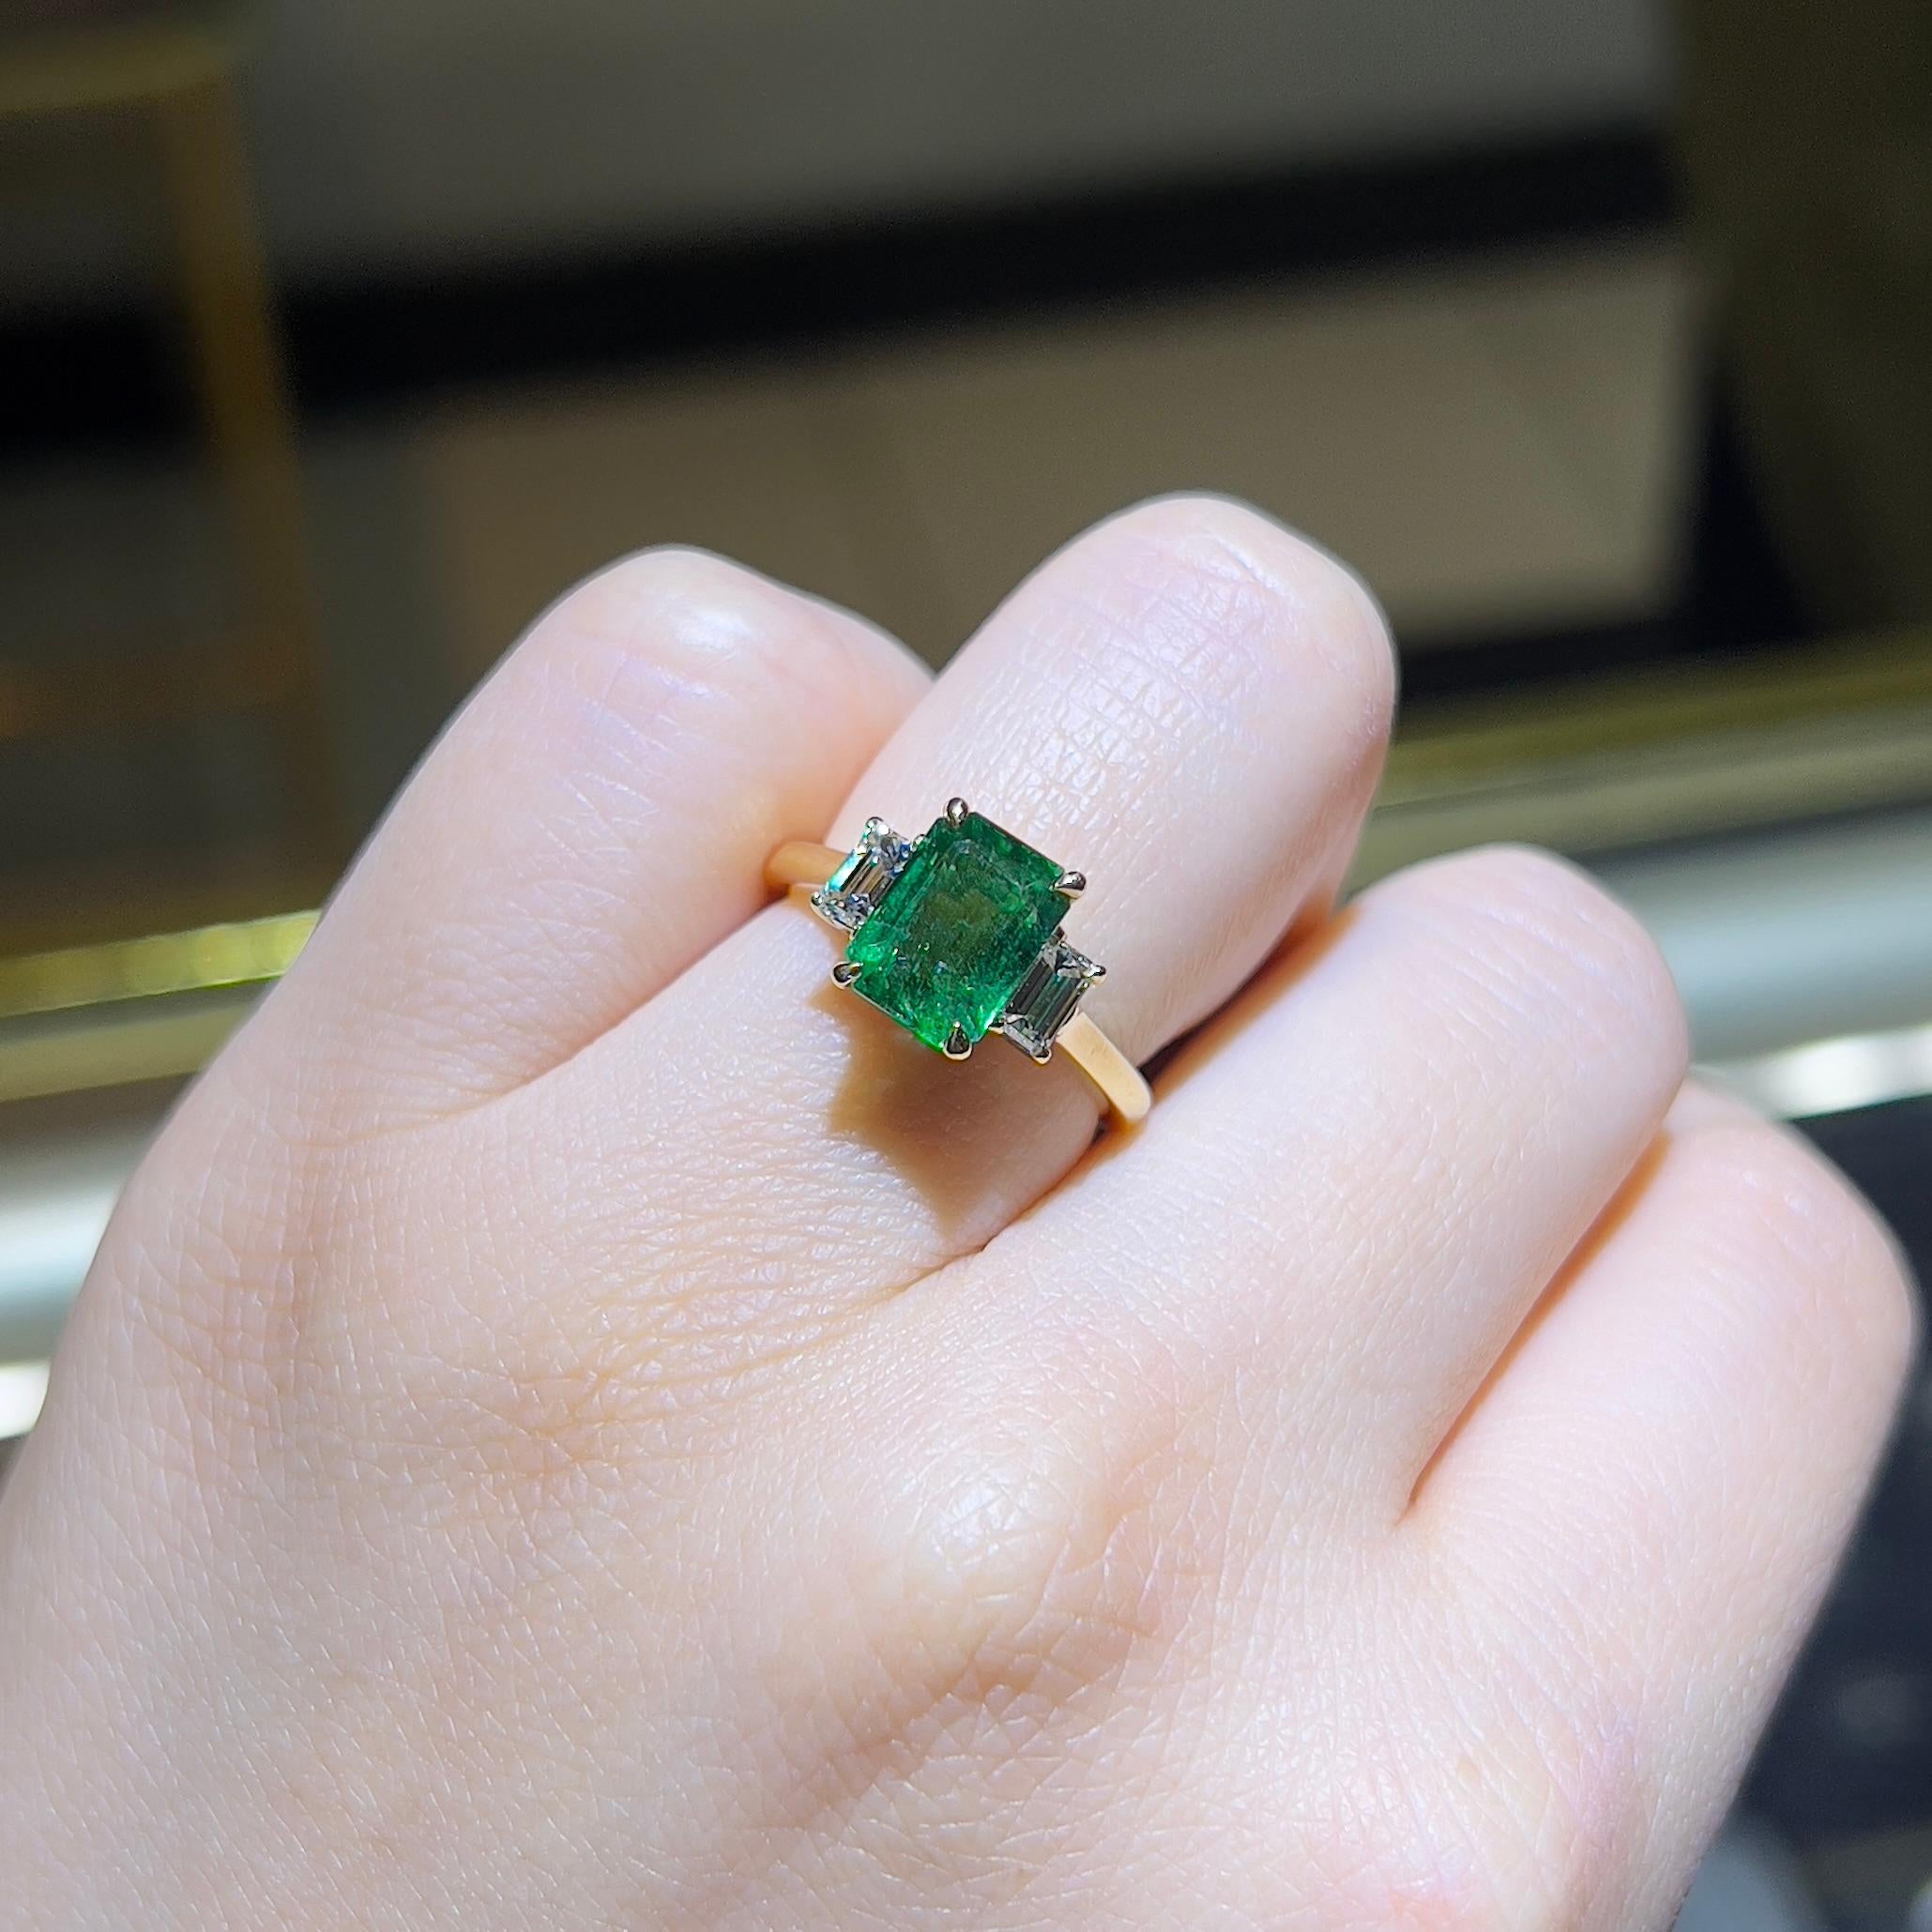 Women's 1.98CT Octagonal Emerald with Diamonds Ring, GIA Certified, set in 18K YG For Sale